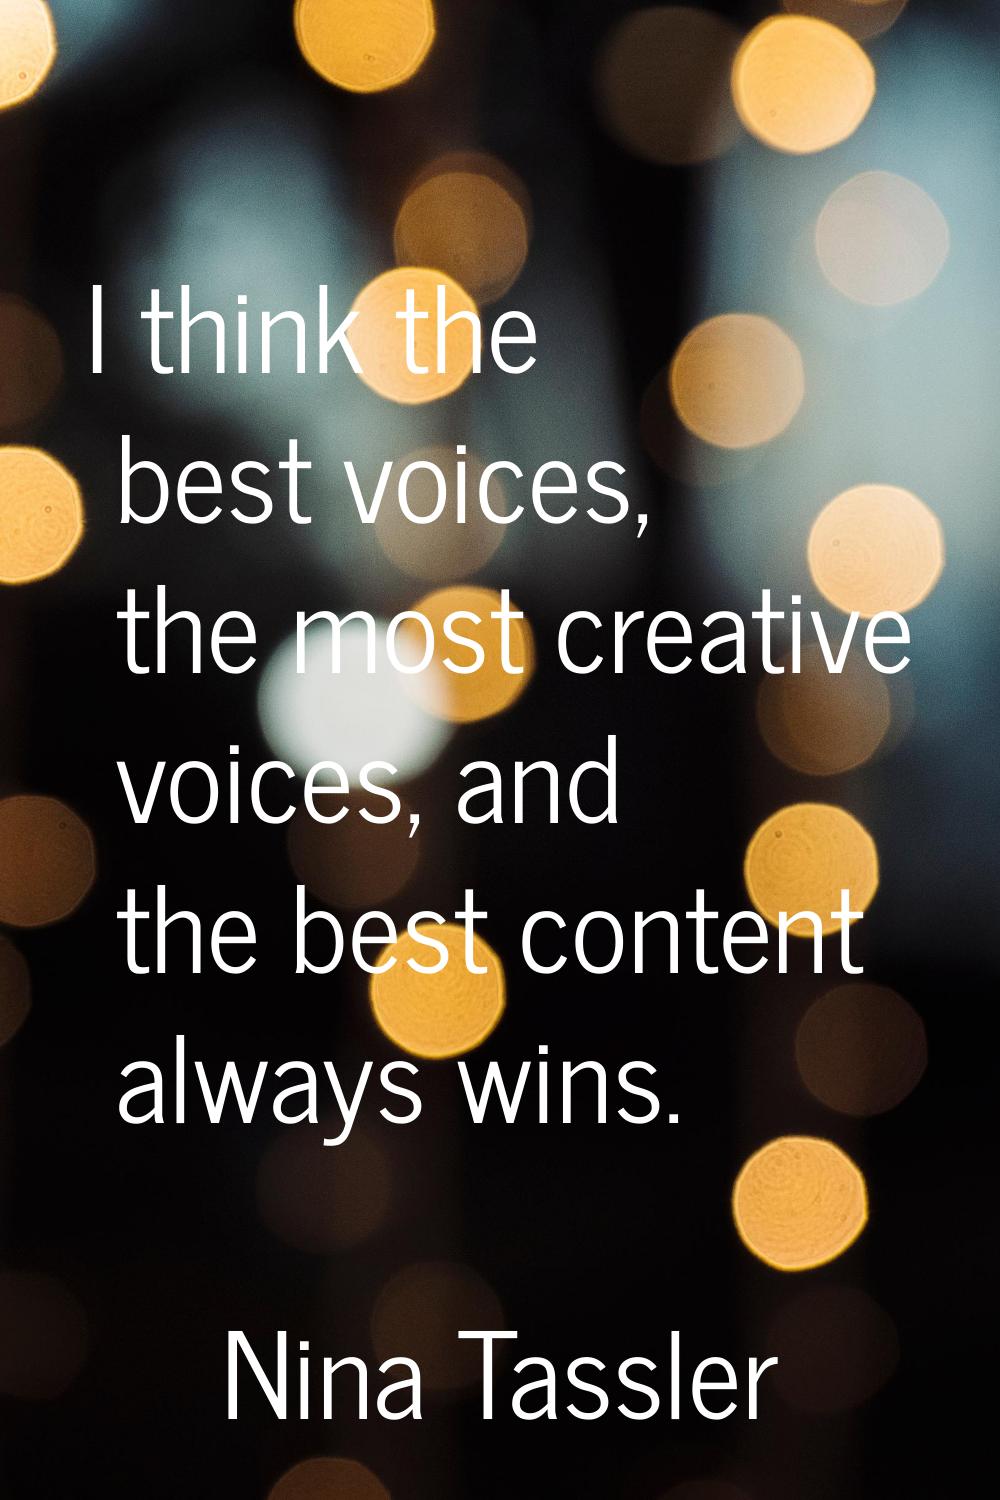 I think the best voices, the most creative voices, and the best content always wins.